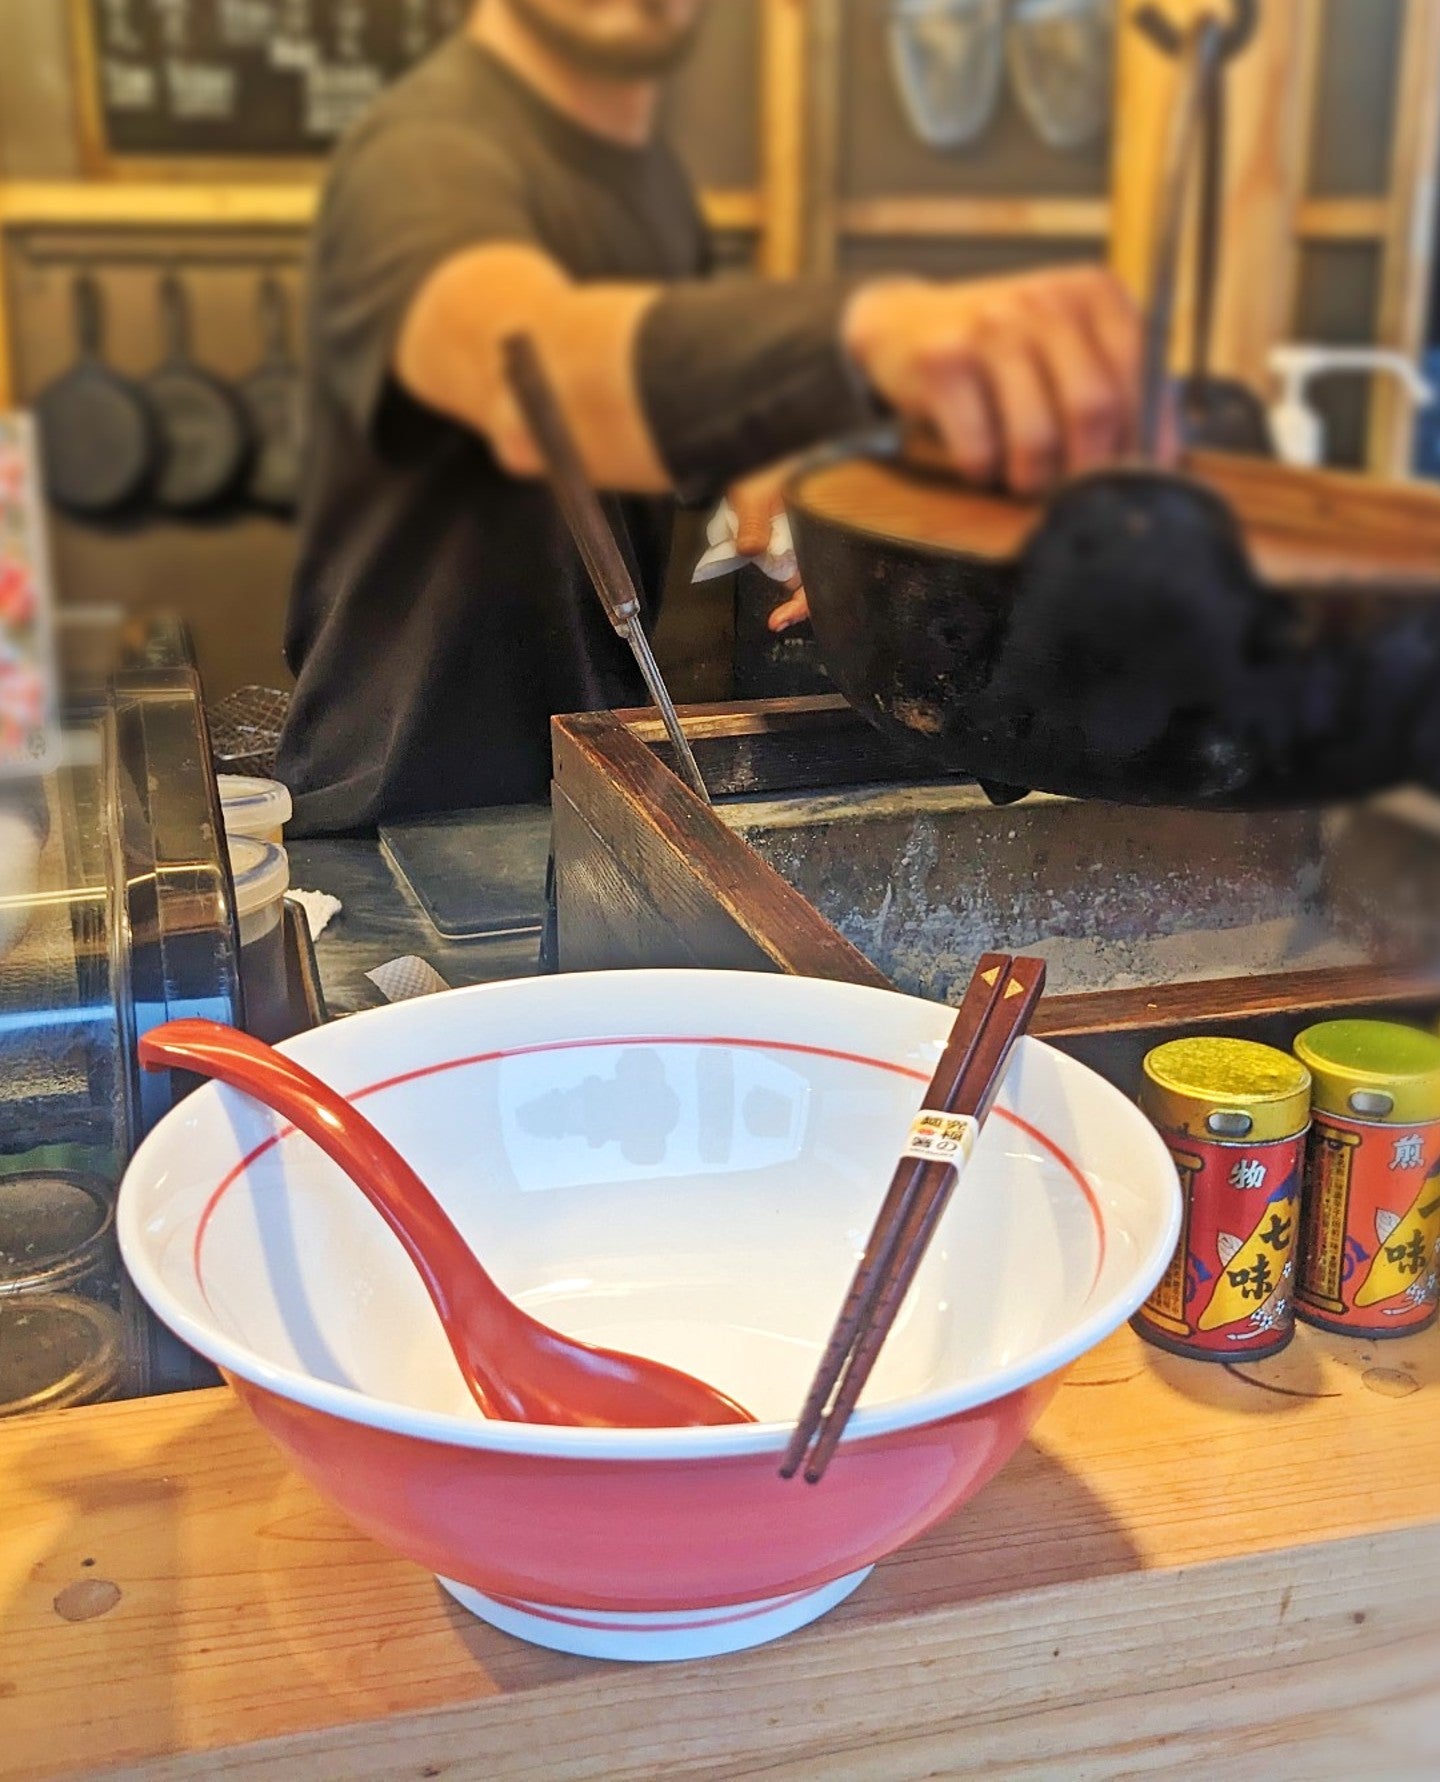 A ramen bowl, chopsticks, and a spoon are placed on the edge of the counter.